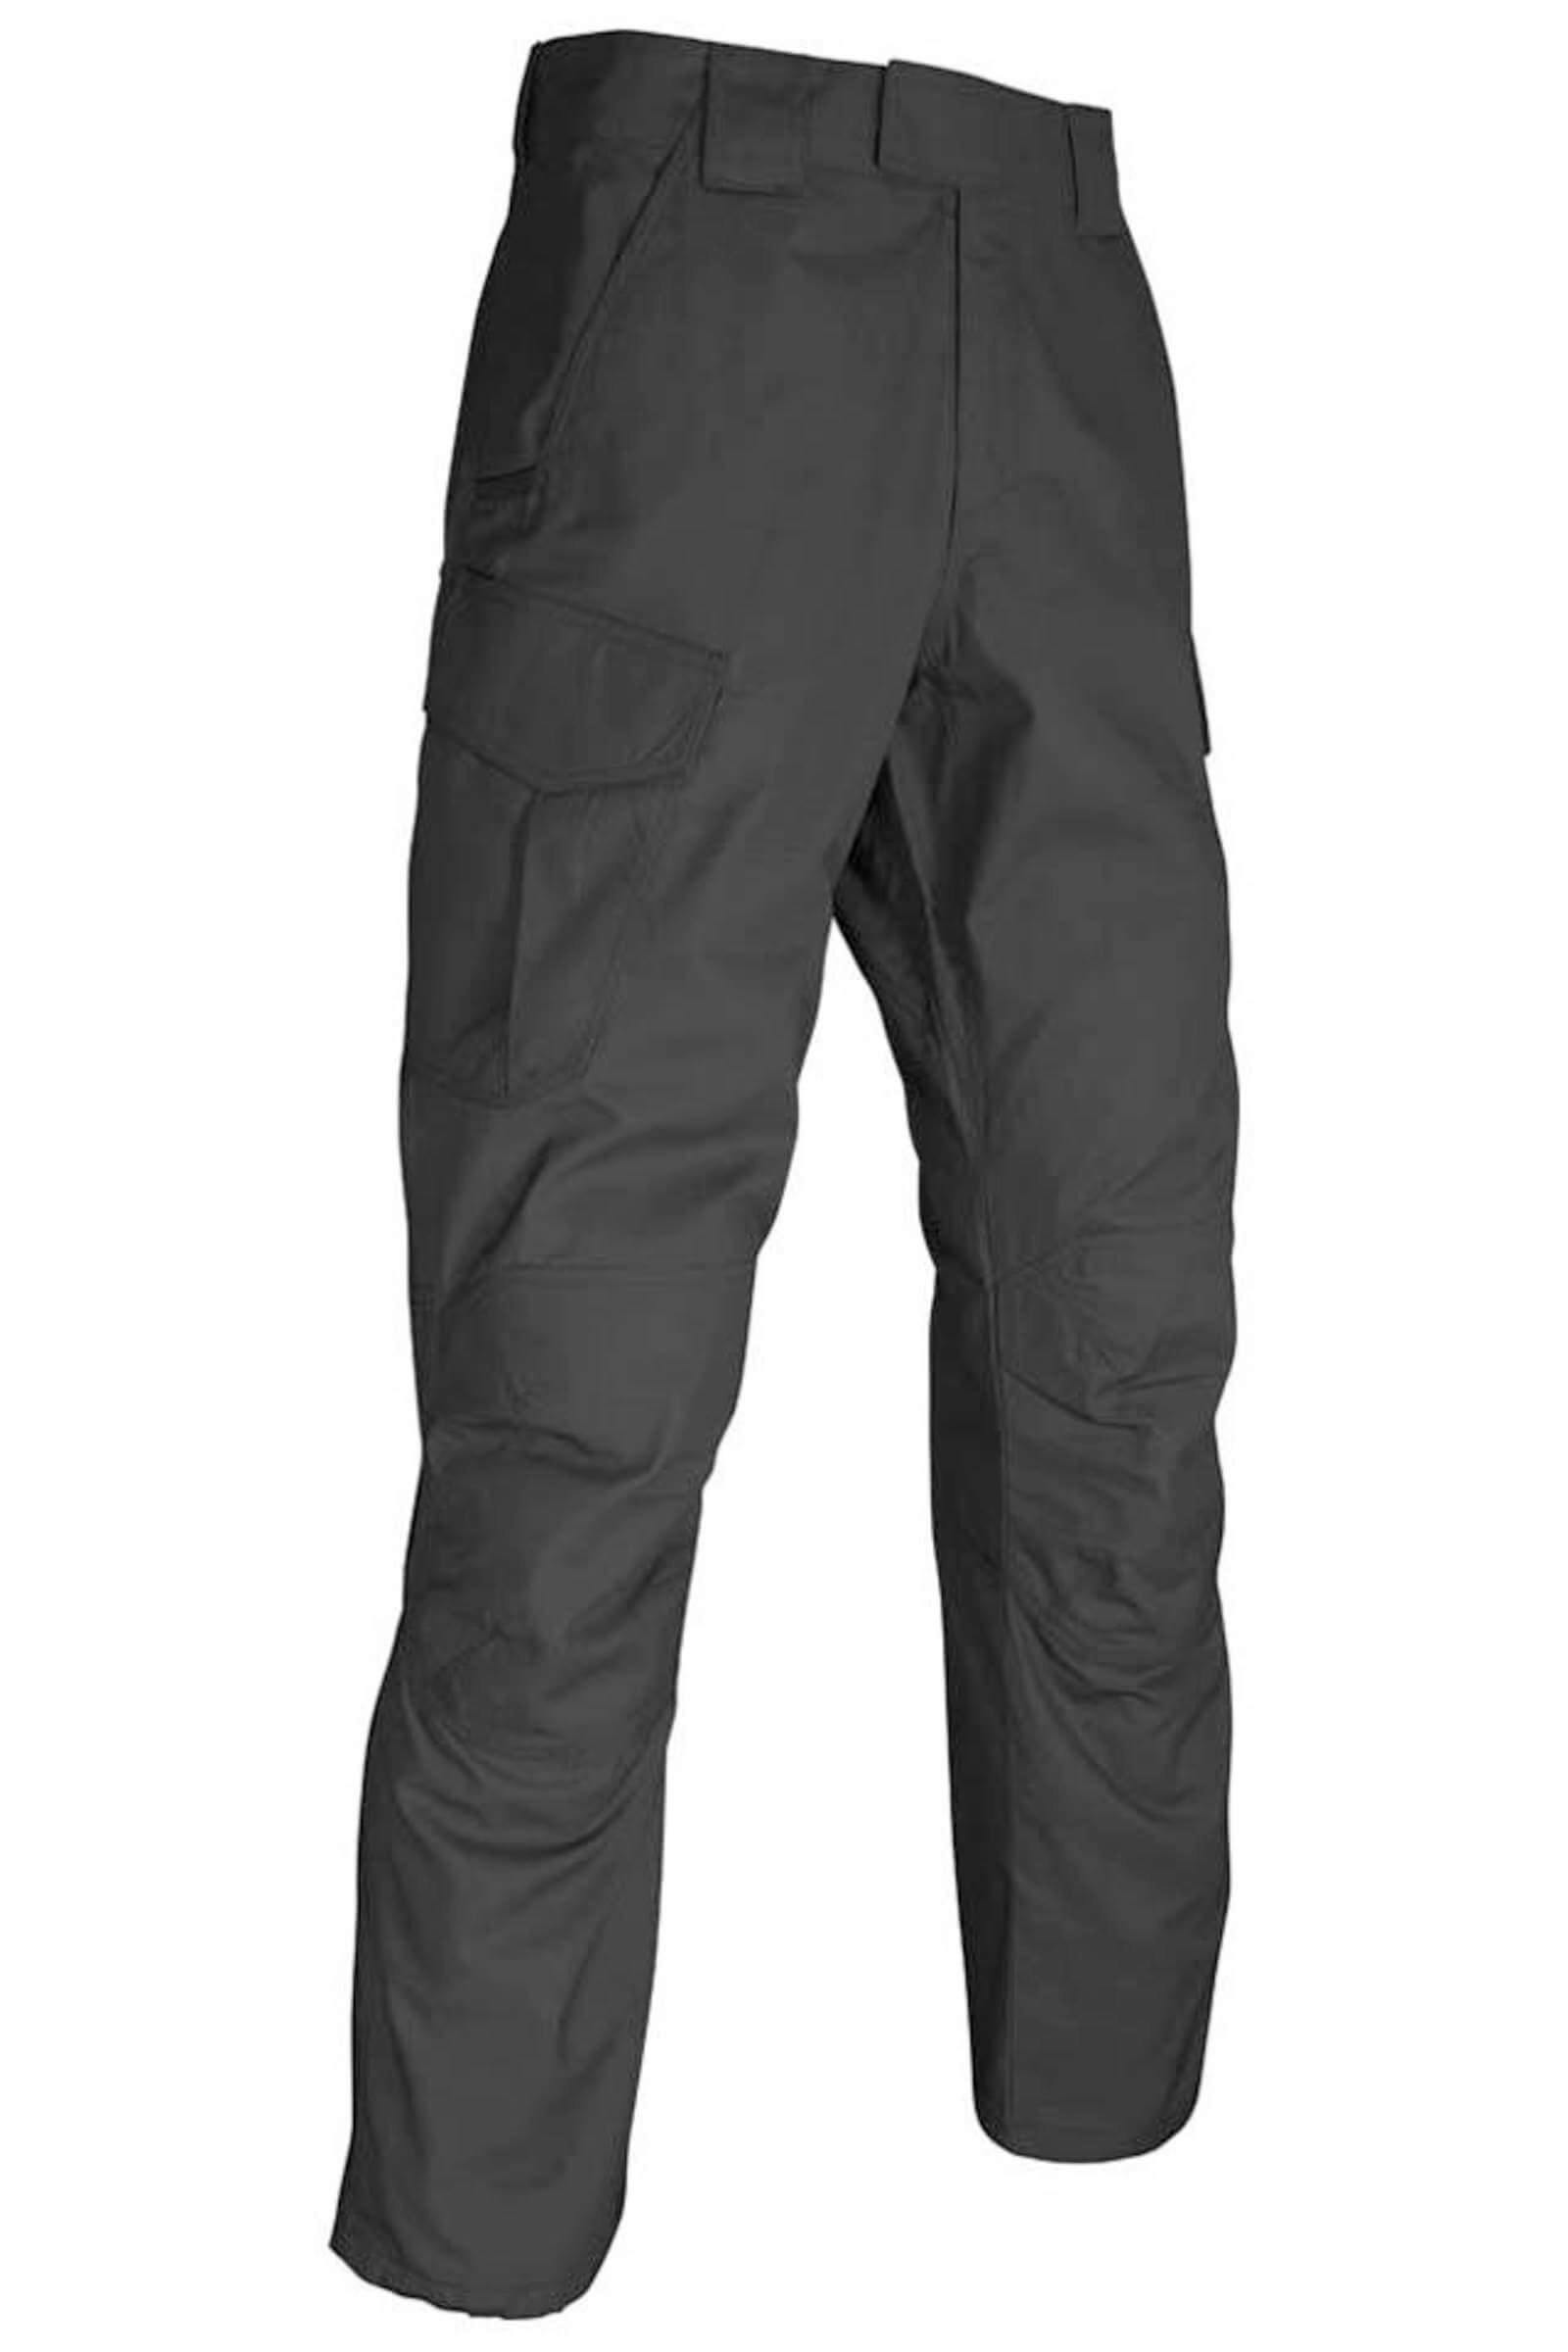 Viper Tactical - Contractor Pants Rip-Stop Trousers